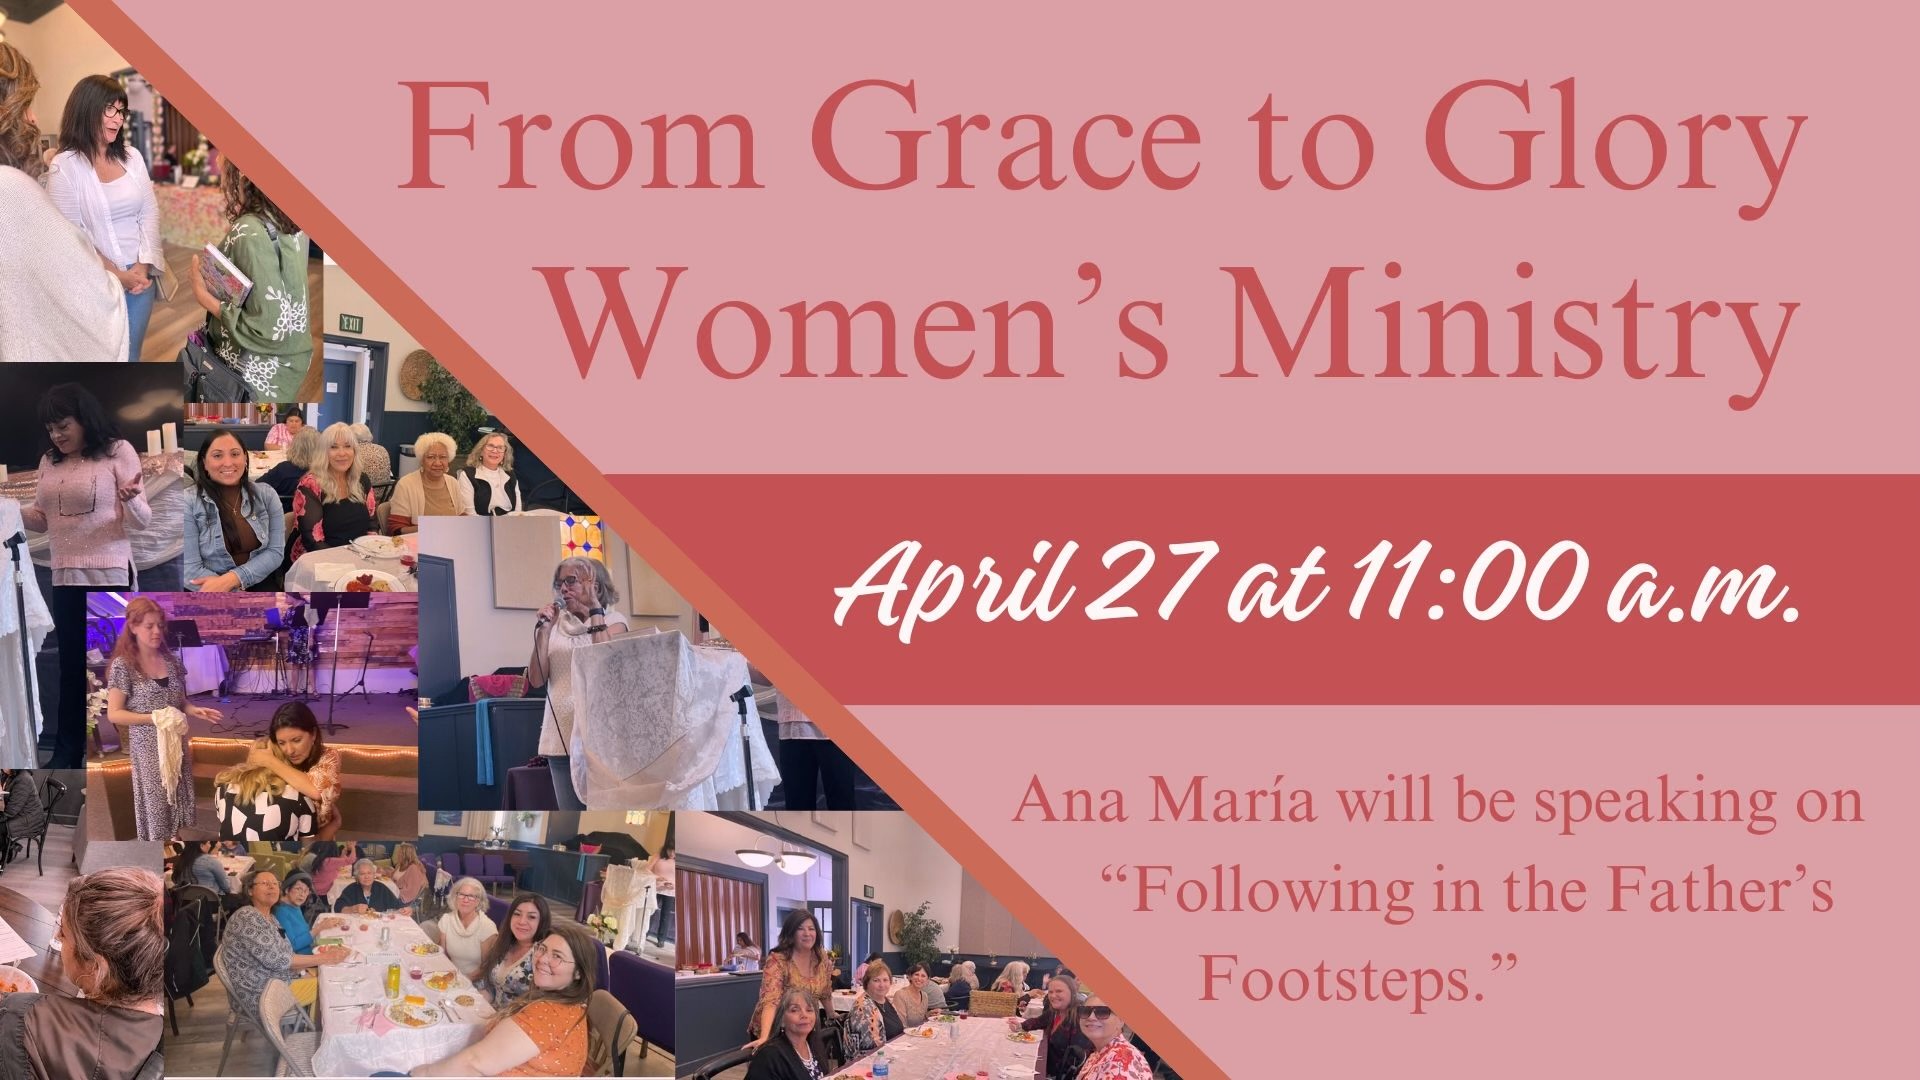 Women’s Ministry event April 27th 11am